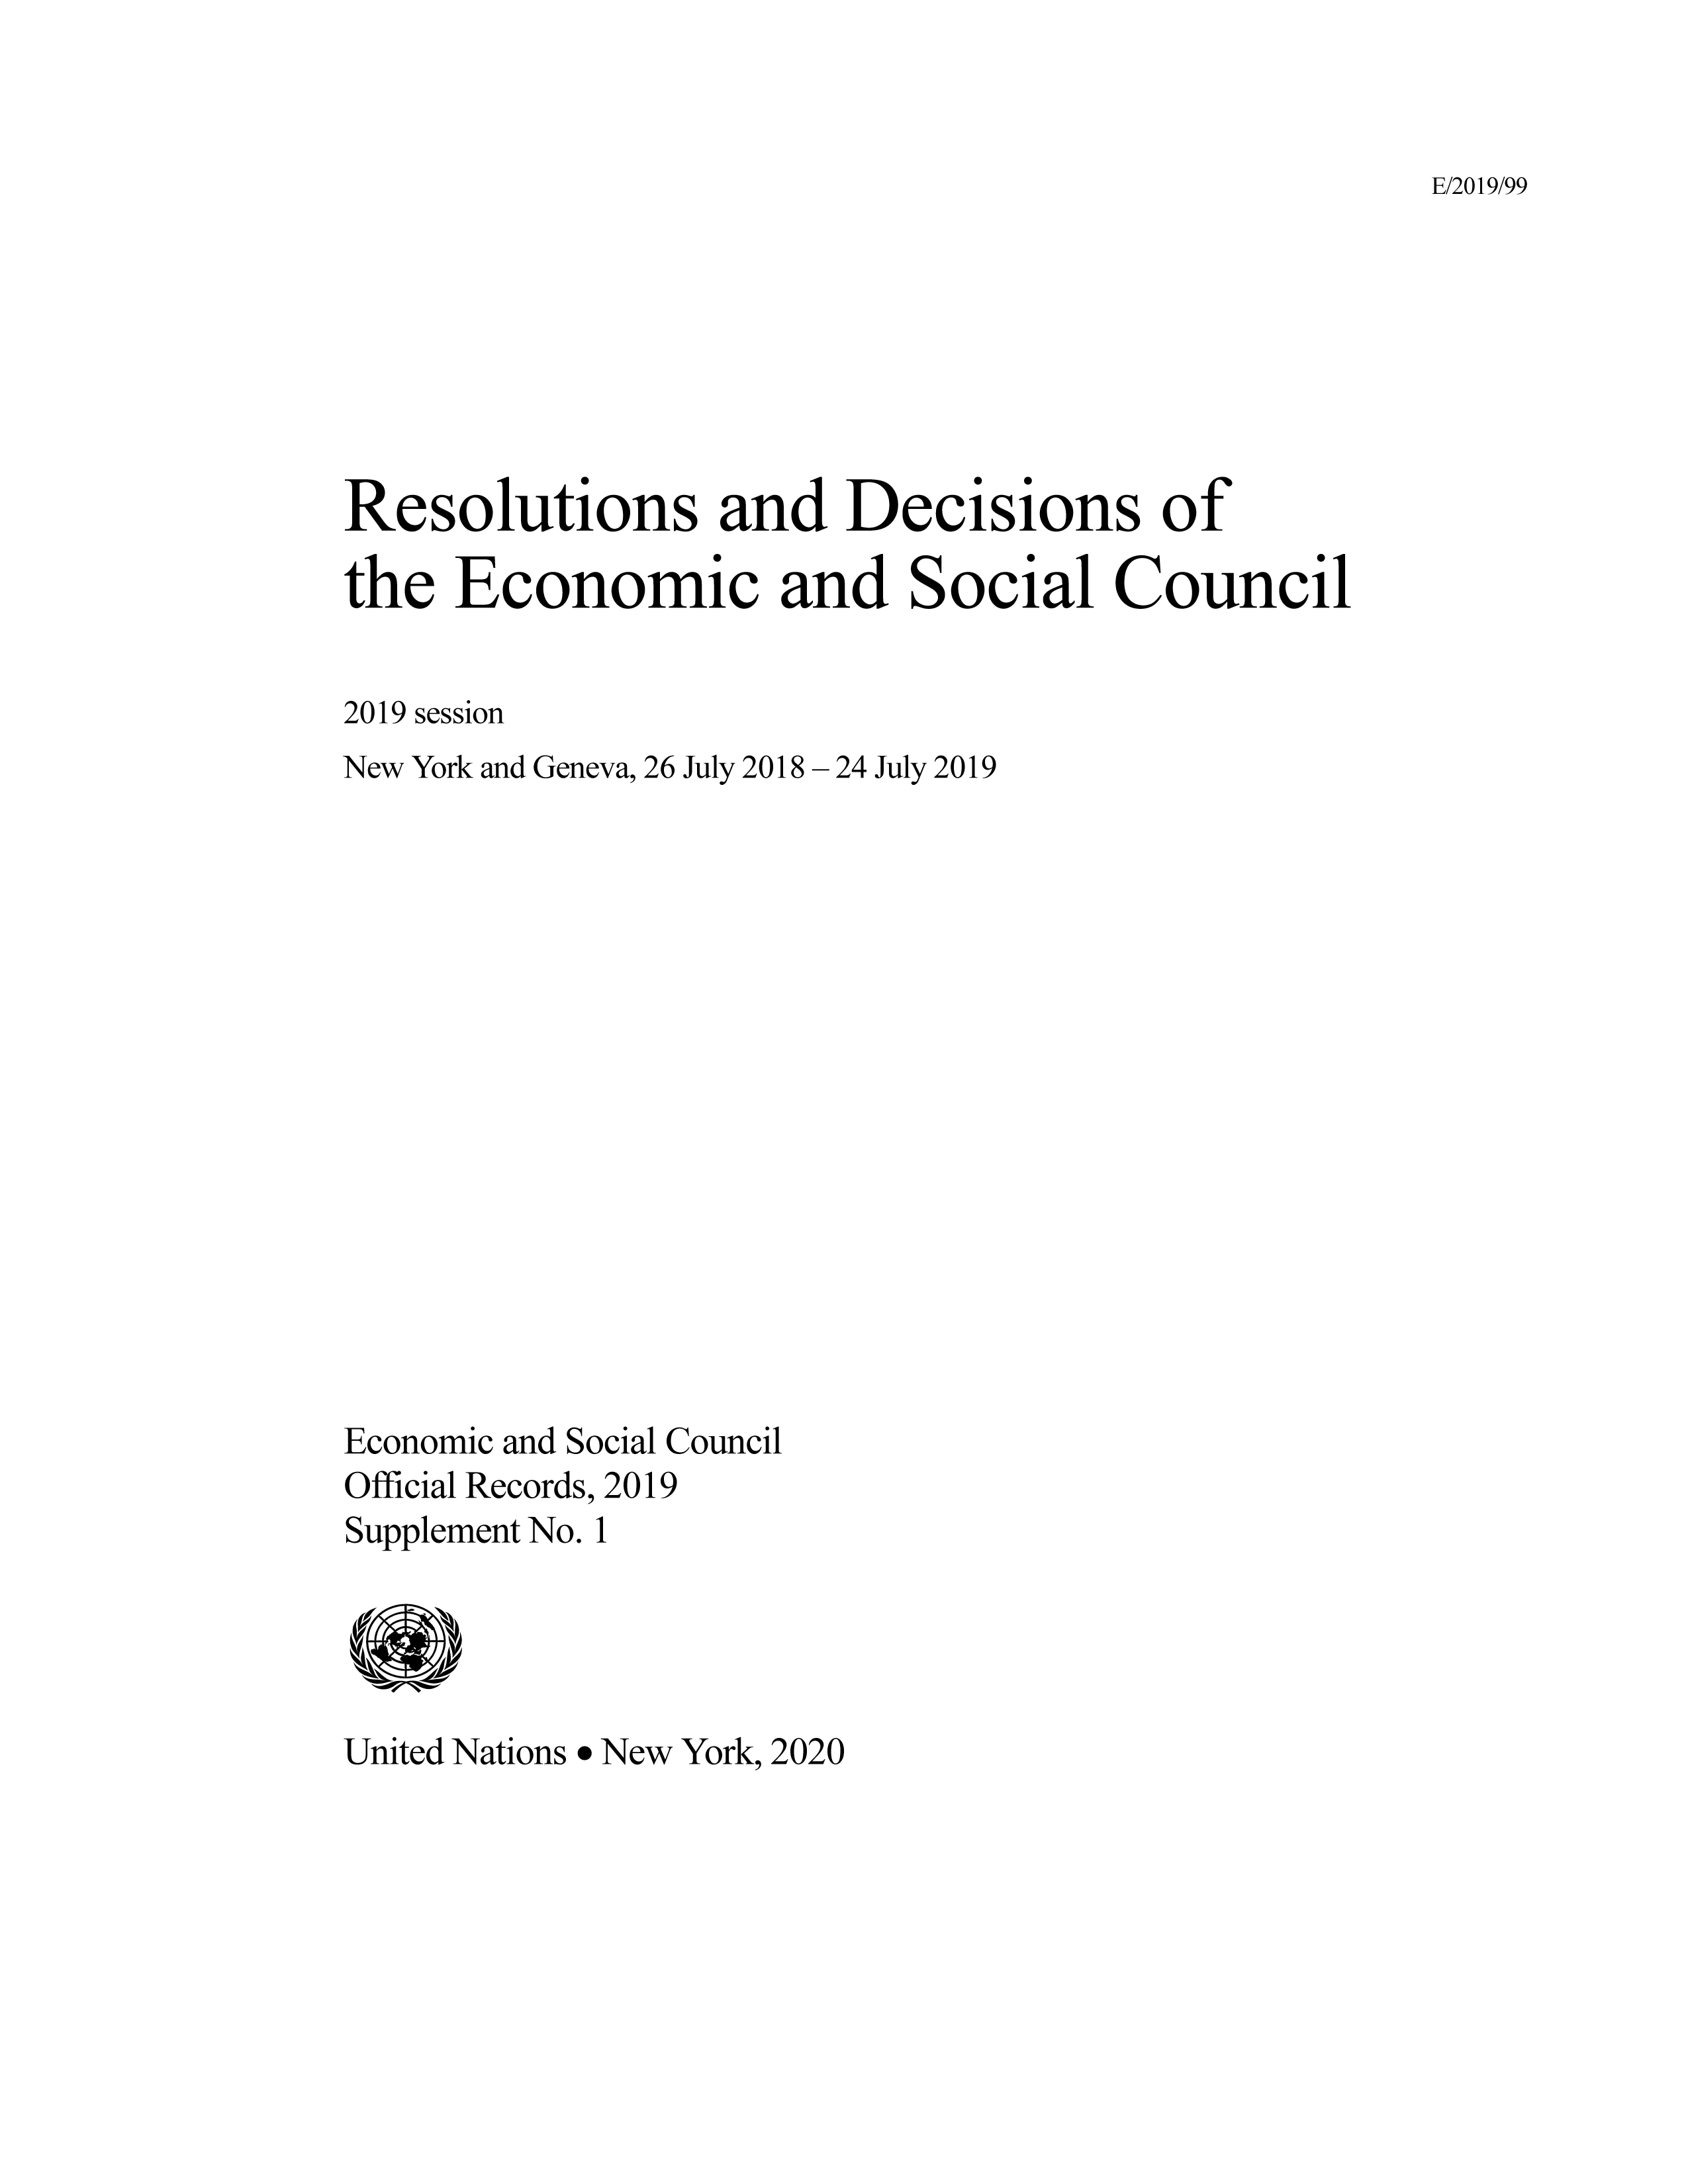 image of Resolutions and Decisions of the Economic and Social Council: 2019 Session